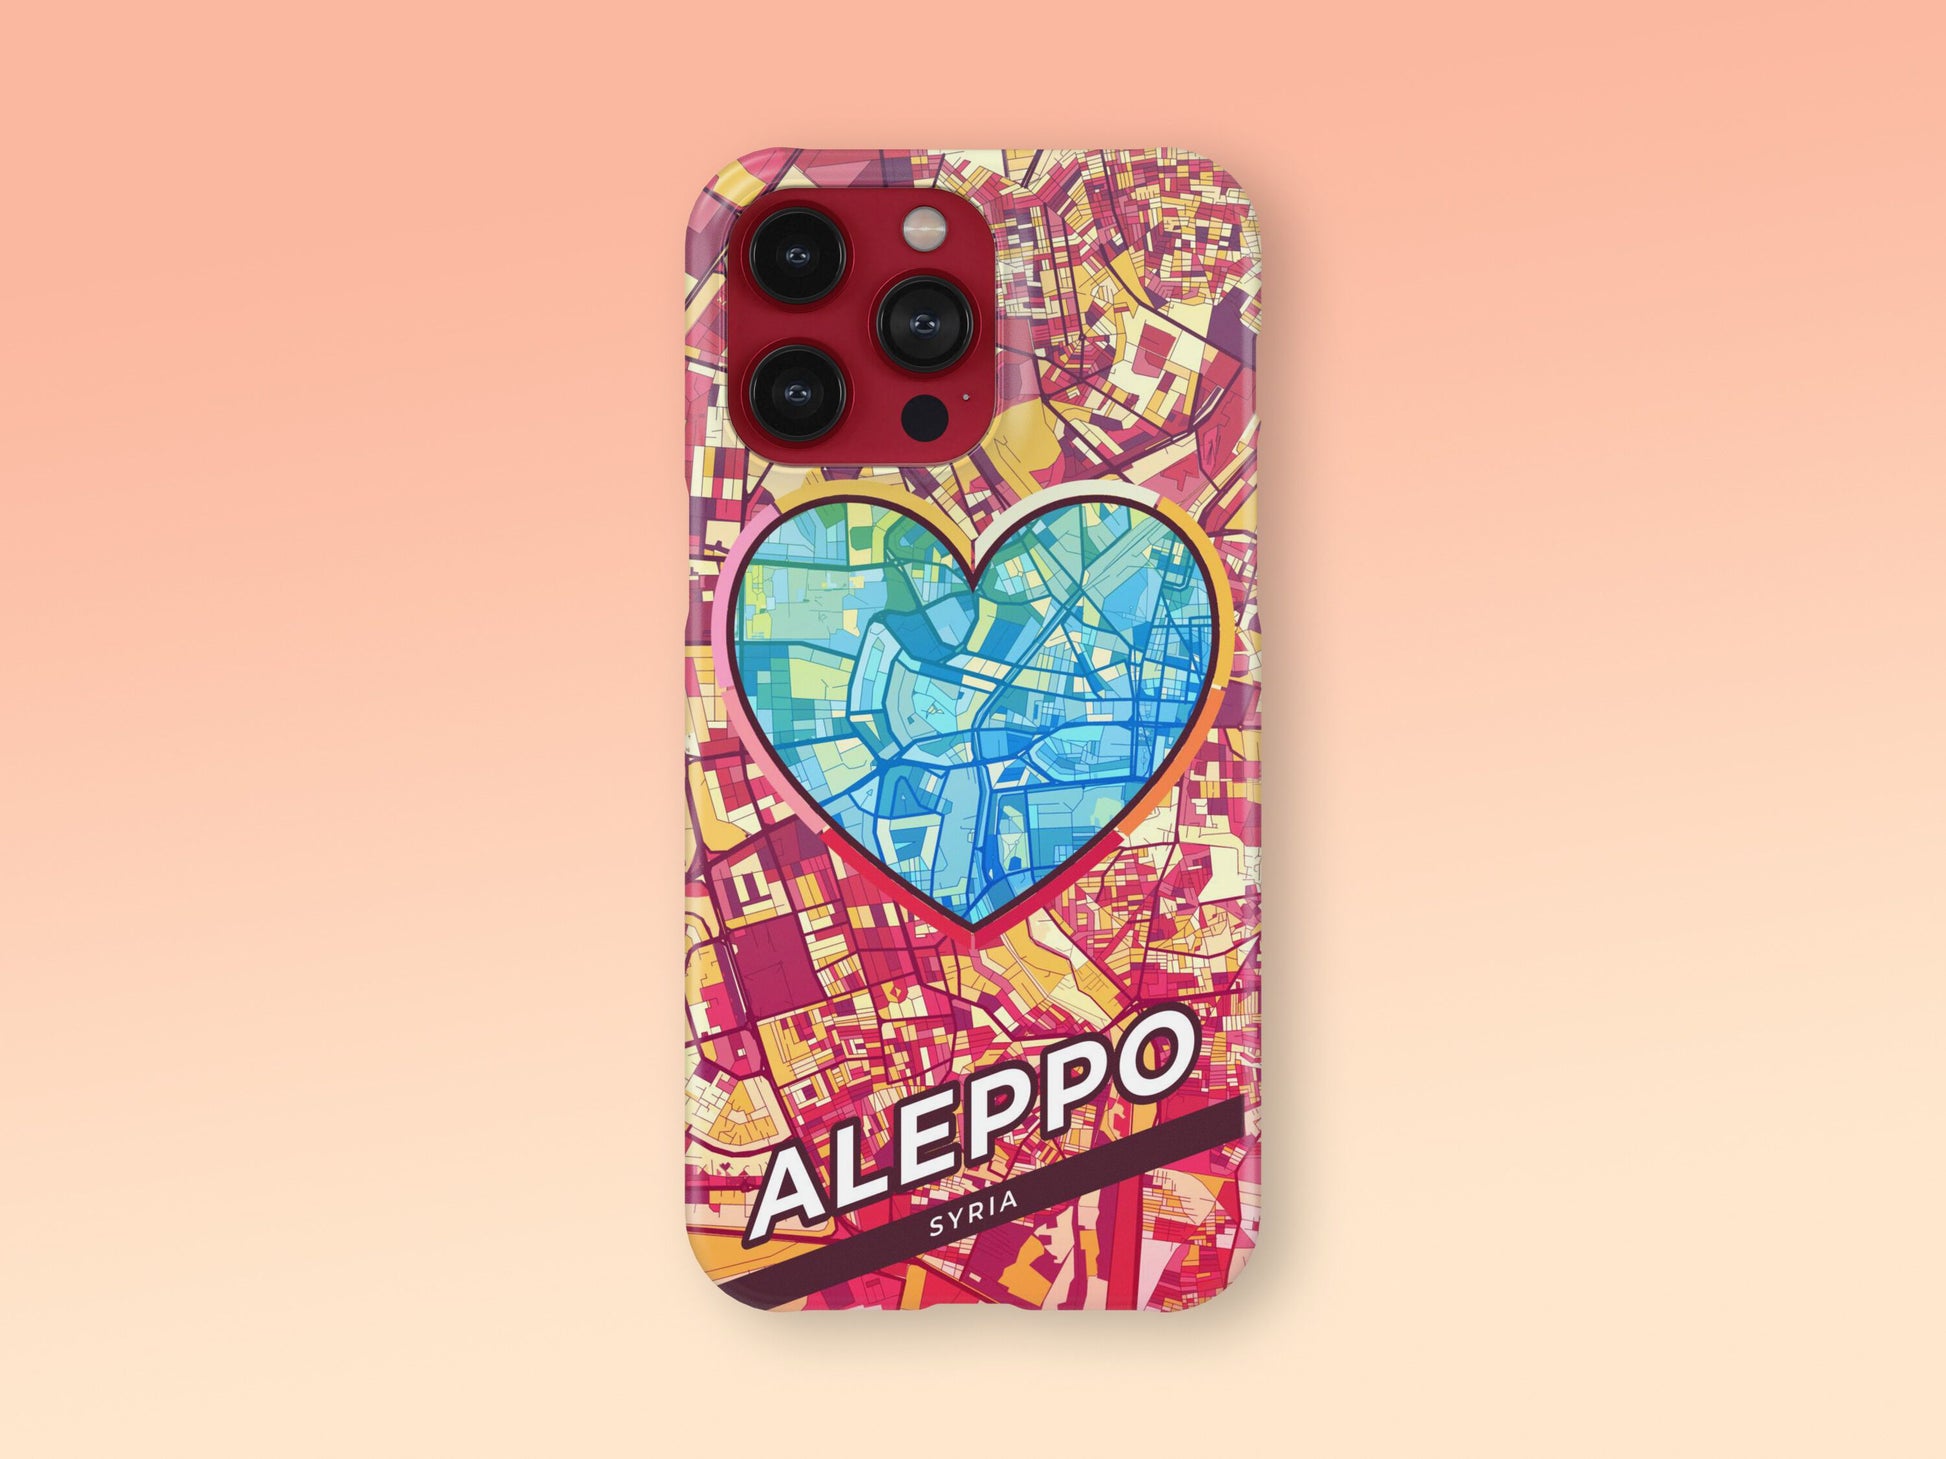 Aleppo Syria slim phone case with colorful icon. Birthday, wedding or housewarming gift. Couple match cases. 2